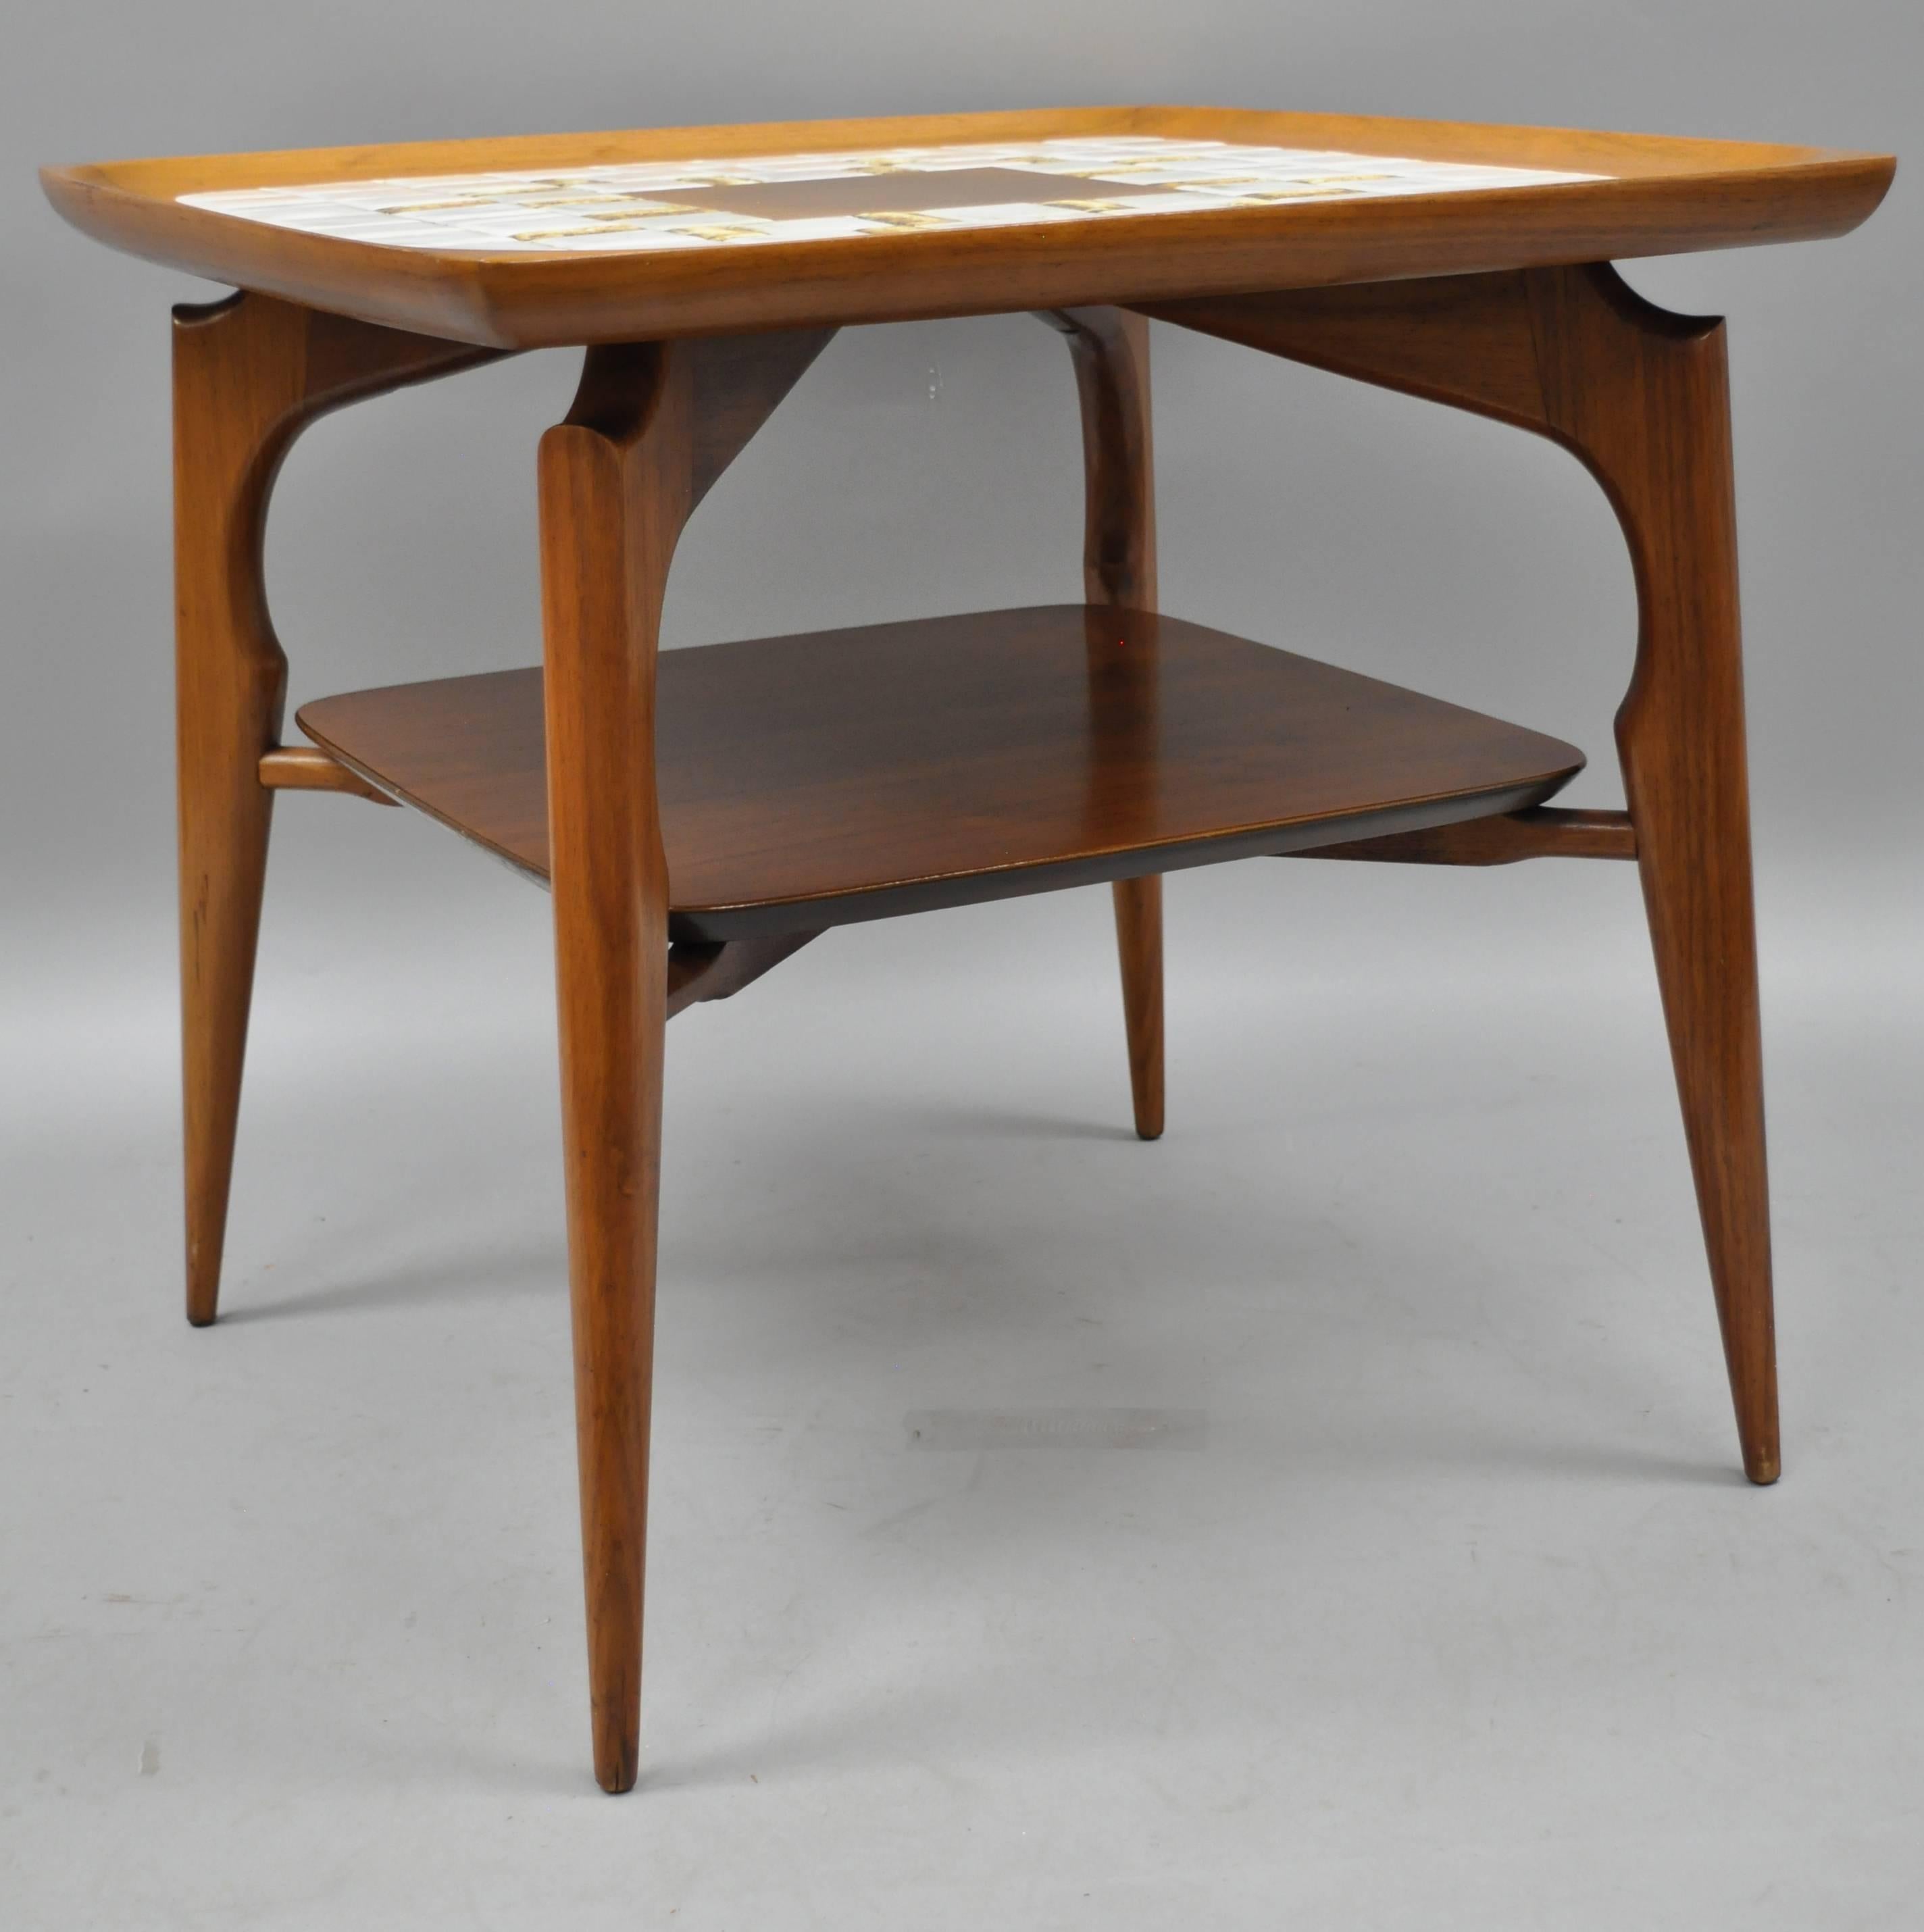 Pair of Danish modern walnut and tile top end tables. Item features mosaic porcelain tile tops, lower shelves, raised and sculpted edges. Solid walnut frames, tapered legs, and sleek sculptural form, circa mid-20th century. Measurements: 23